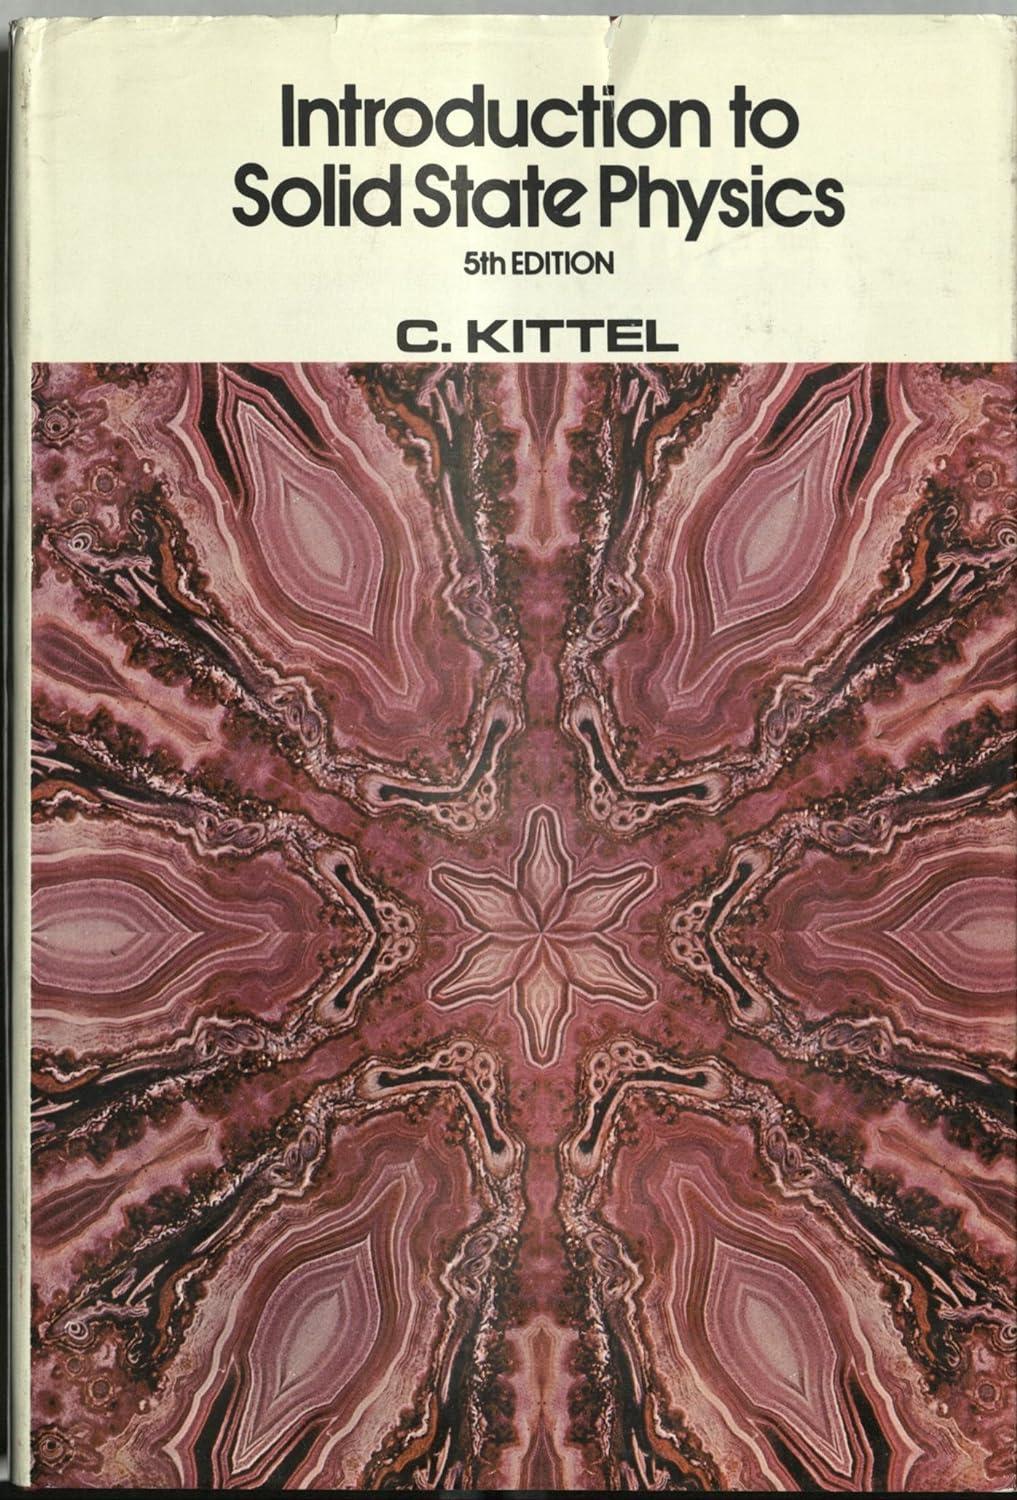 introduction to solid state physics 5th edition c. kittel 0471490245, 978-0471490241